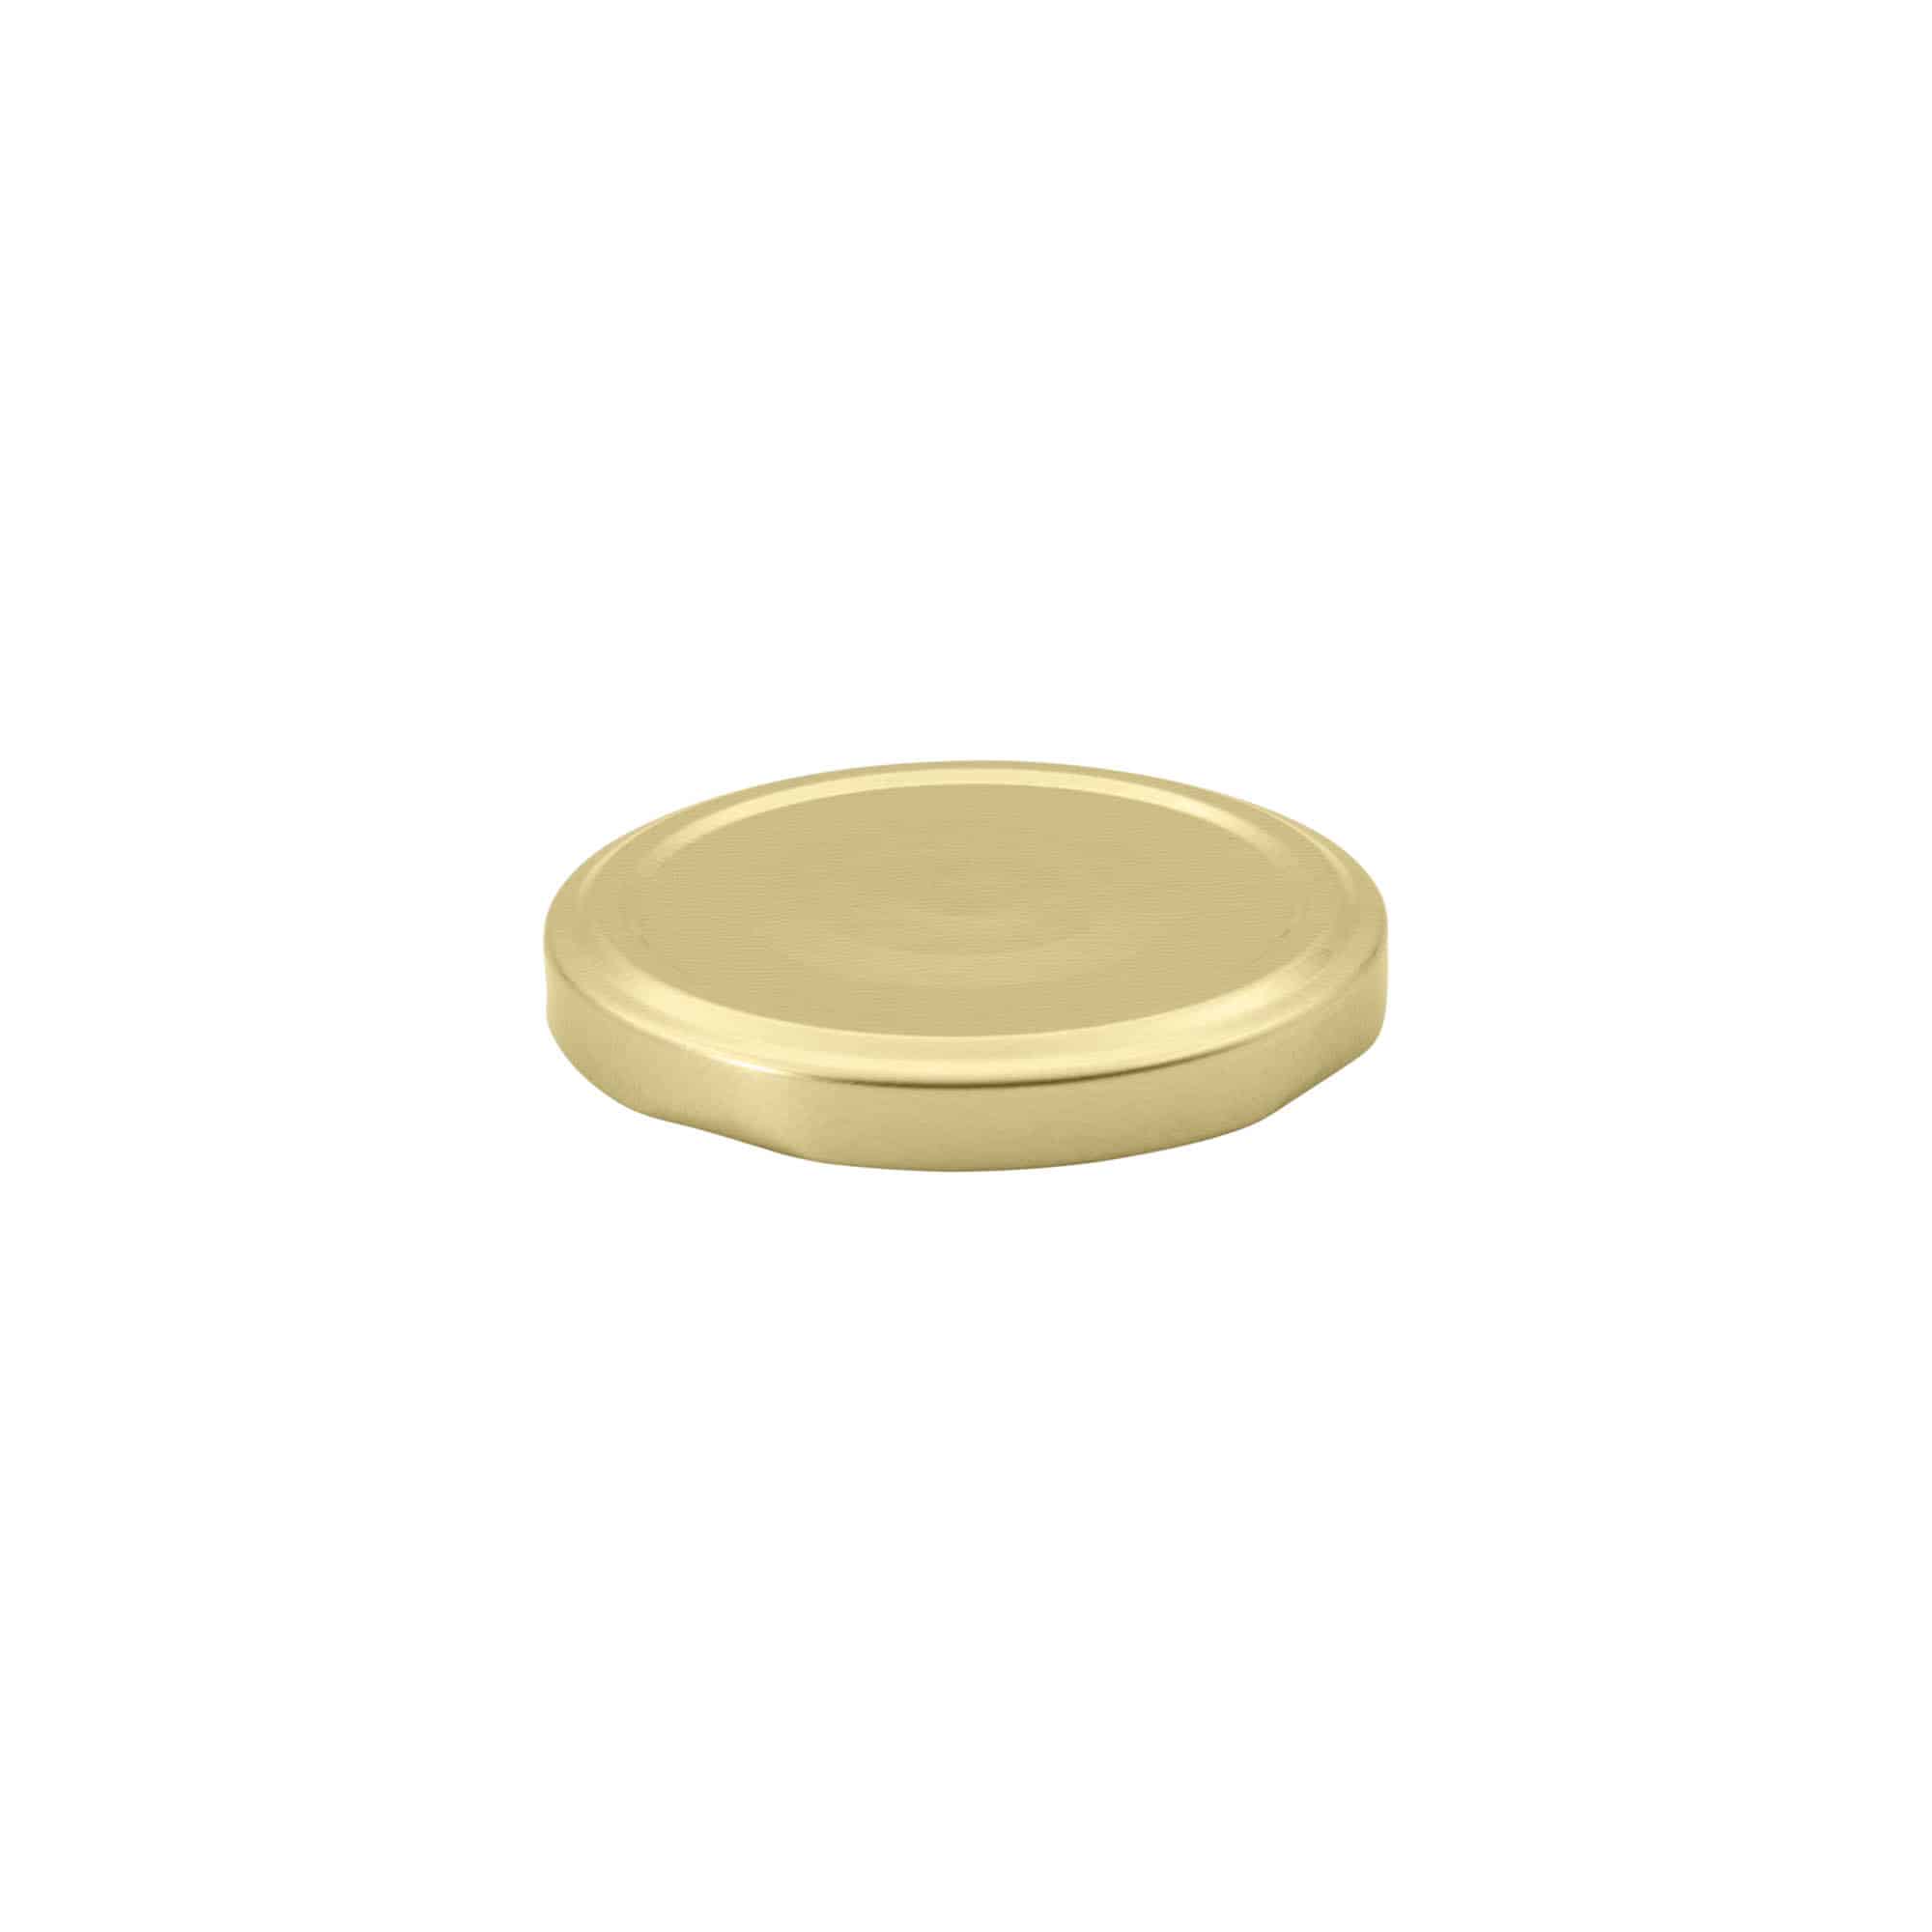 Twist off lid, tinplate, gold, for opening: TO 66